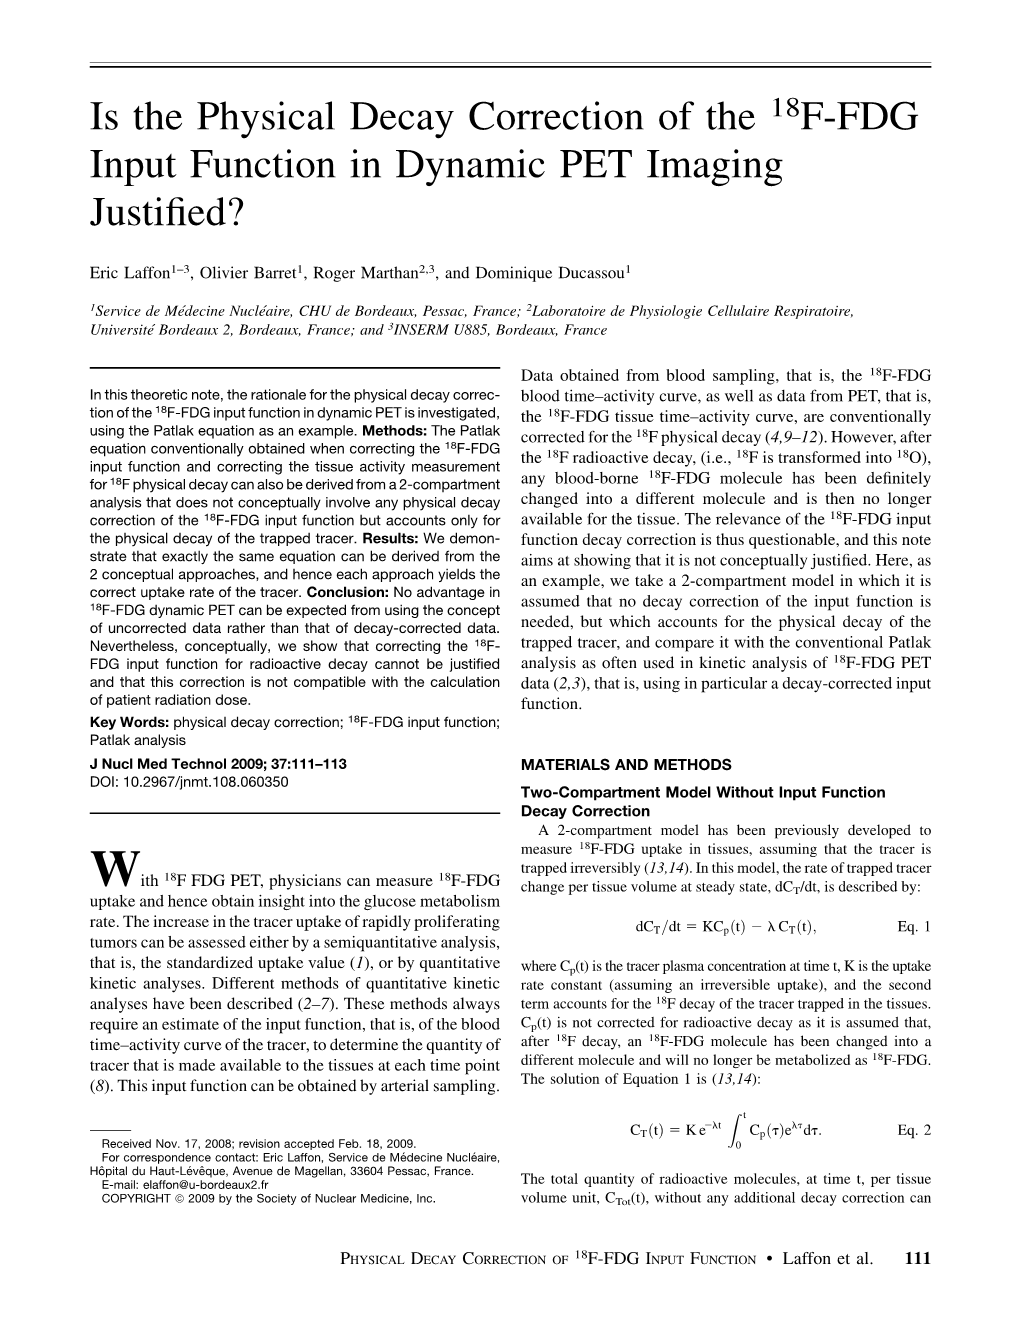 Is the Physical Decay Correction of the 18F-FDG Input Function in Dynamic PET Imaging Justiﬁed?